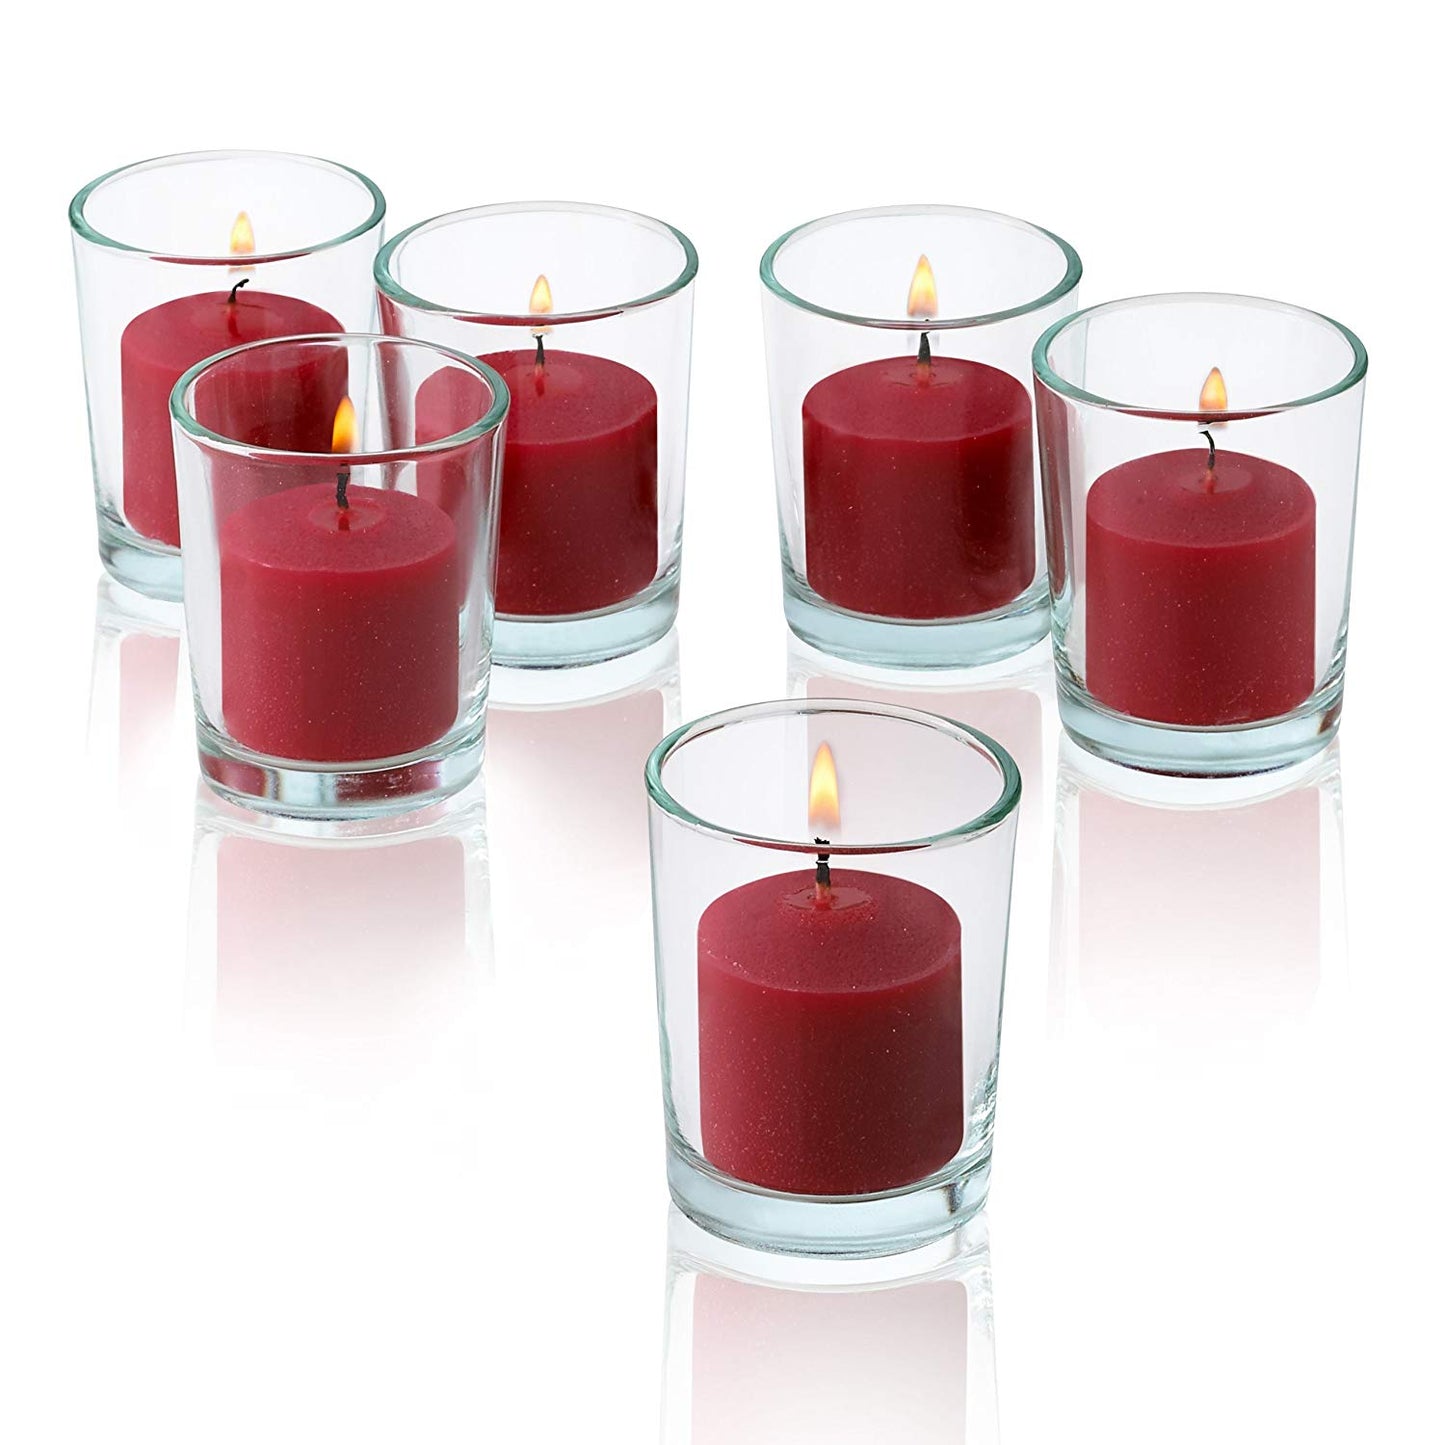 Wax Votive Candles 8 Hours Burning Unscented Ideal for Birthday Aromatherapy Party Candle Gardens & Home Décor (Set of 12, Red)